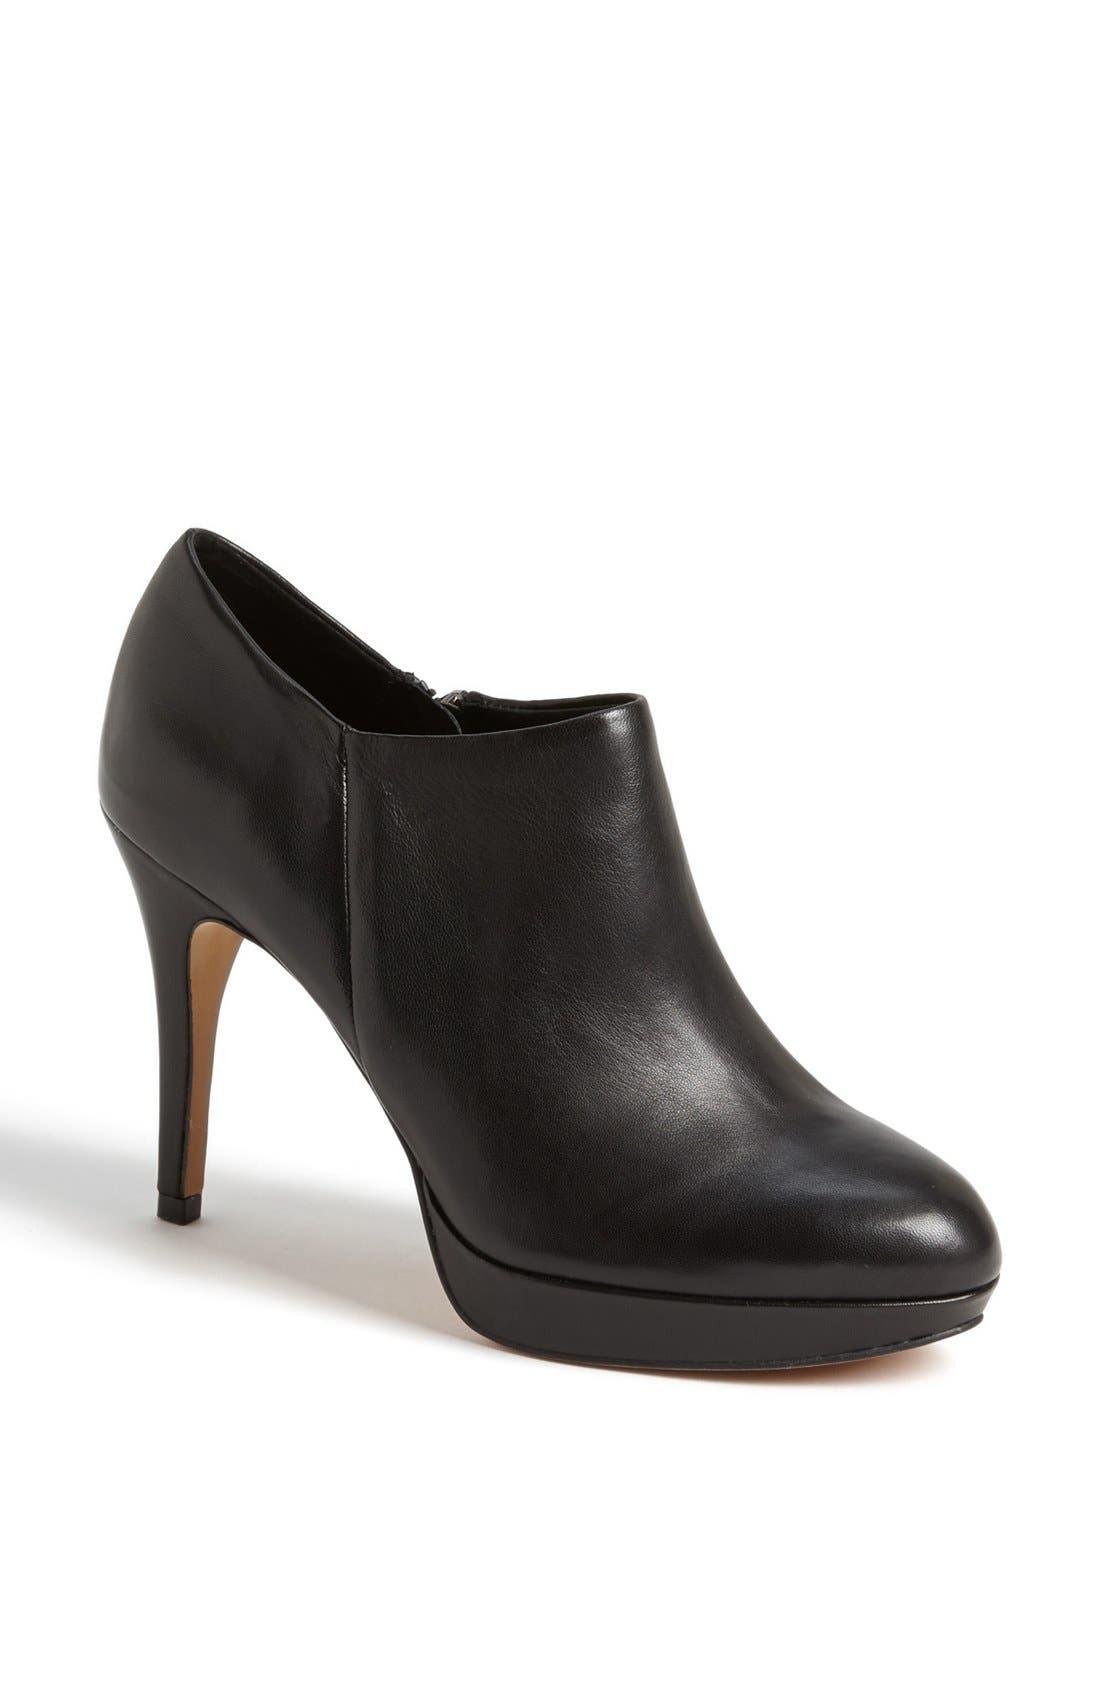 UPC 886216641356 product image for Women's Vince Camuto 'Elvin' Bootie, Size 7.5 M - Black | upcitemdb.com